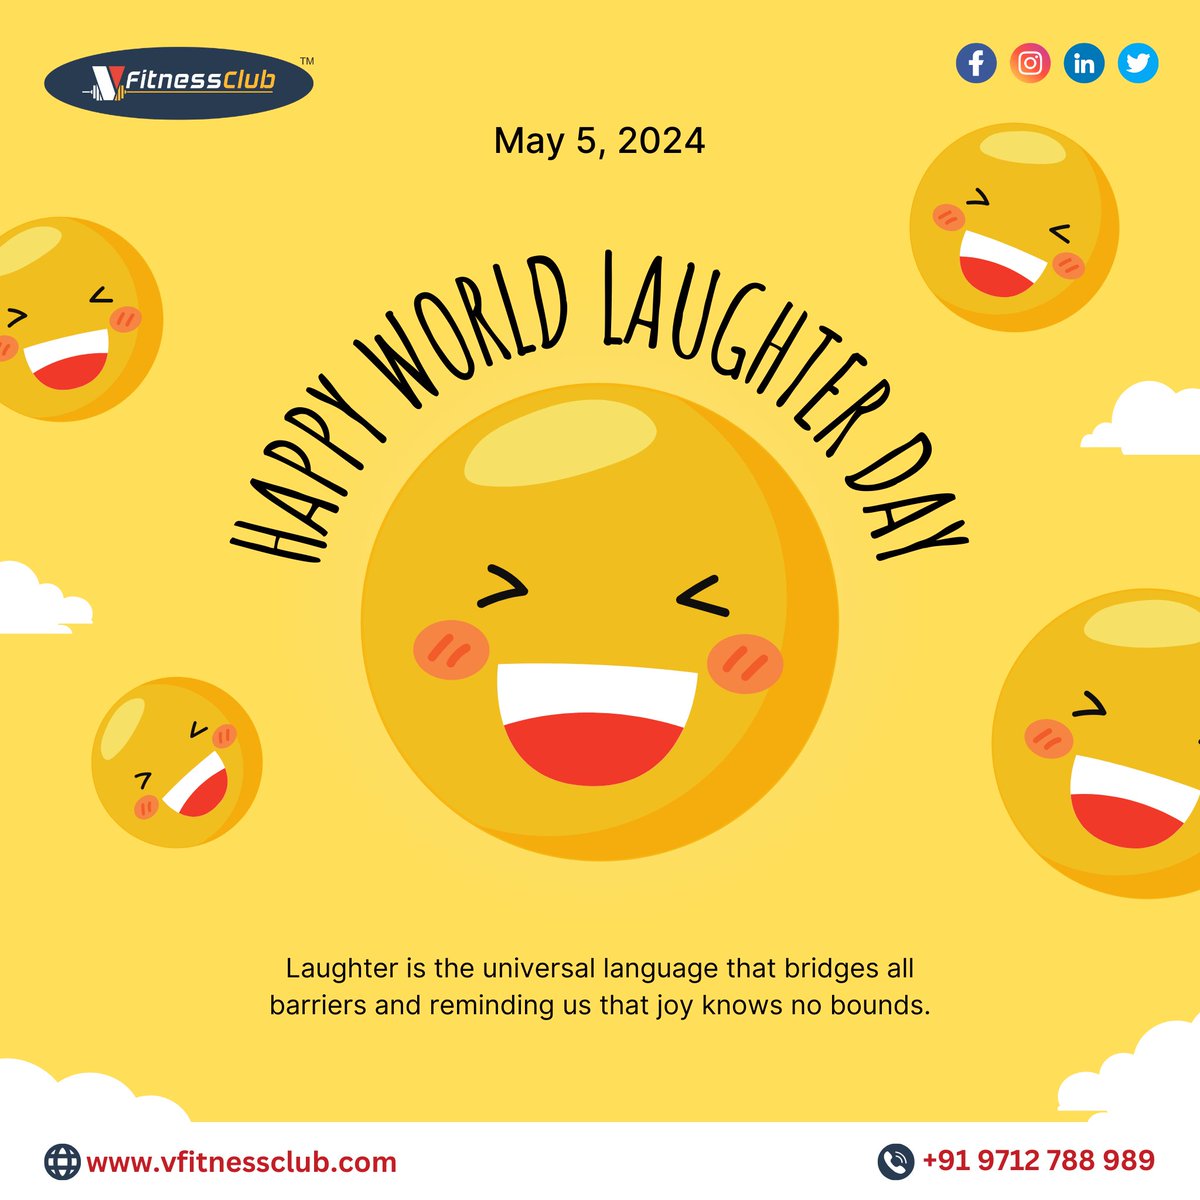 Laughter is the shortest distance between two people

#LaughterDay #SpreadTheLaughter #JoyfulMoments #LaughOutLoud #HappinessEveryday #SmileMore #LaughterIsTheBestMedicine #ShareTheJoy #KeepLaughing #LaughterDay2024